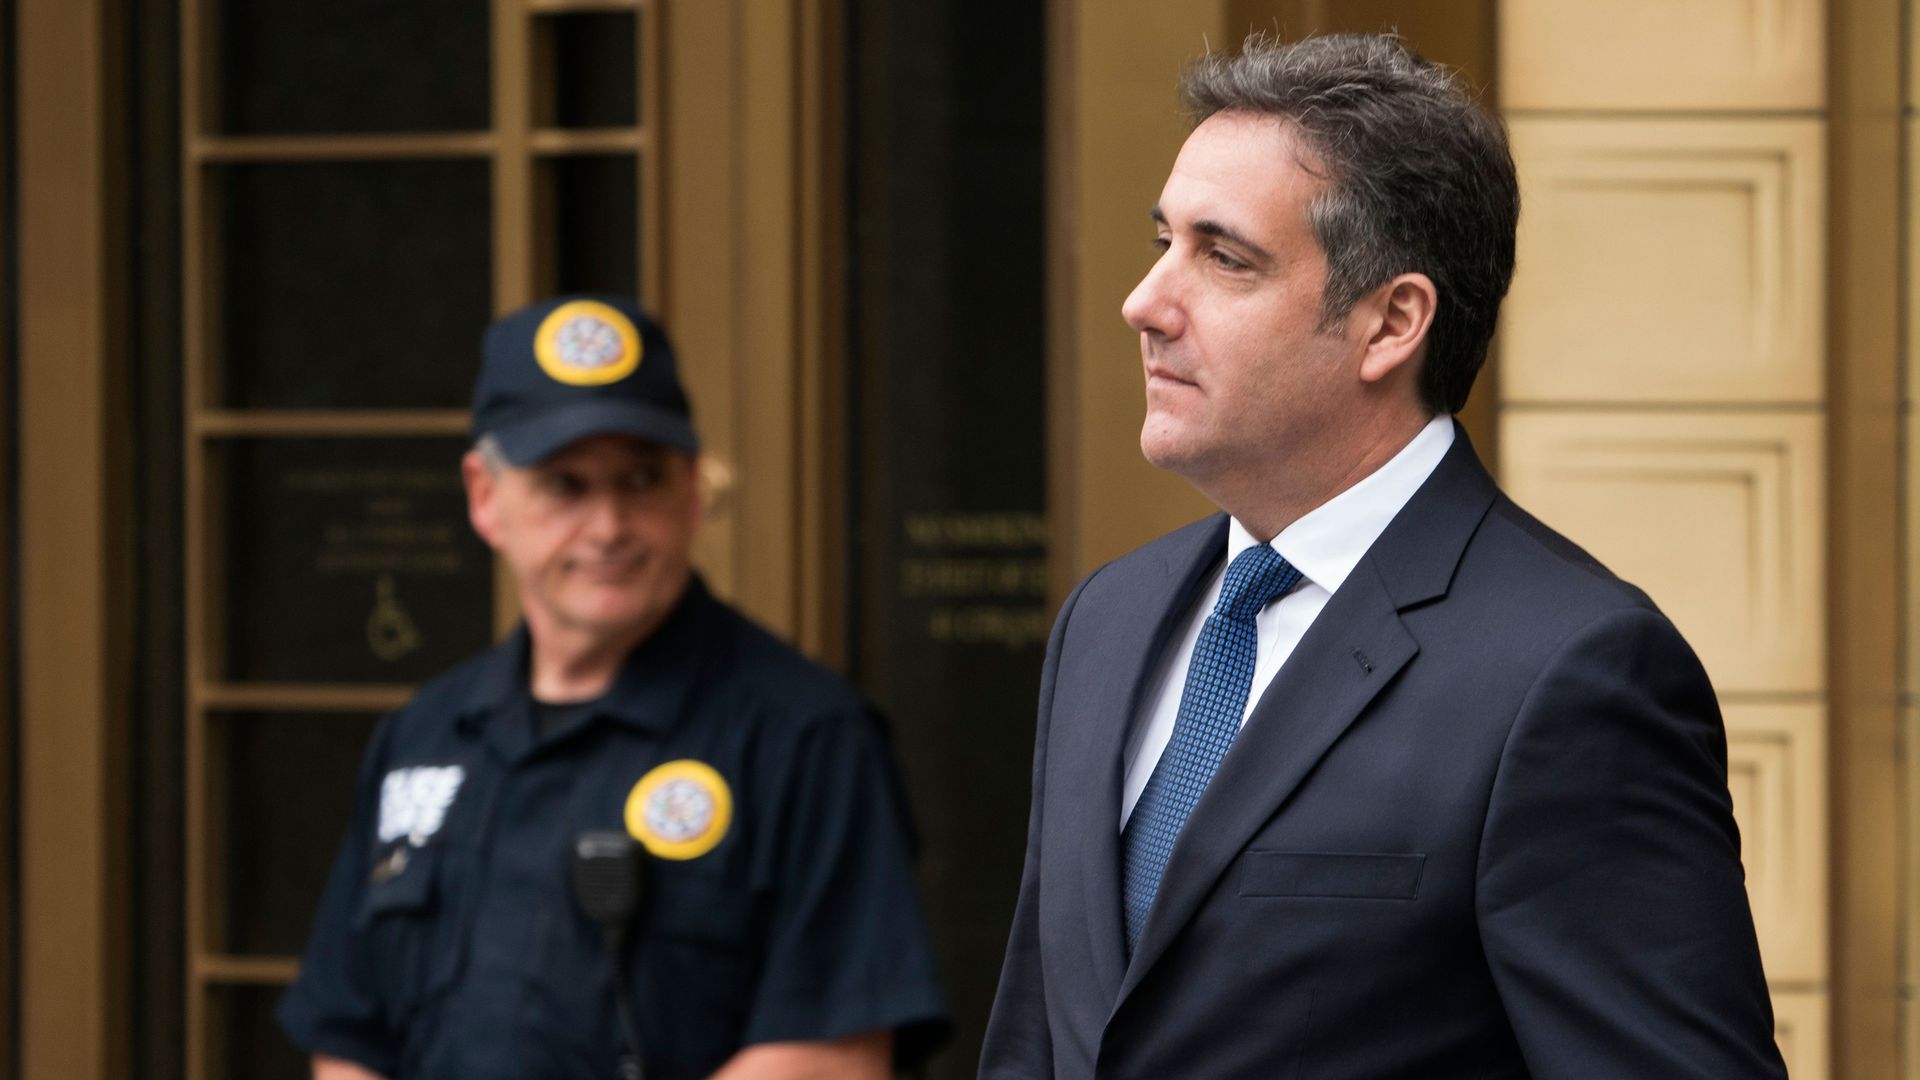 Michael Cohen, a longtime personal lawyer and confidante for President Trump. Photo: Don Emmert/AFP/Getty Images